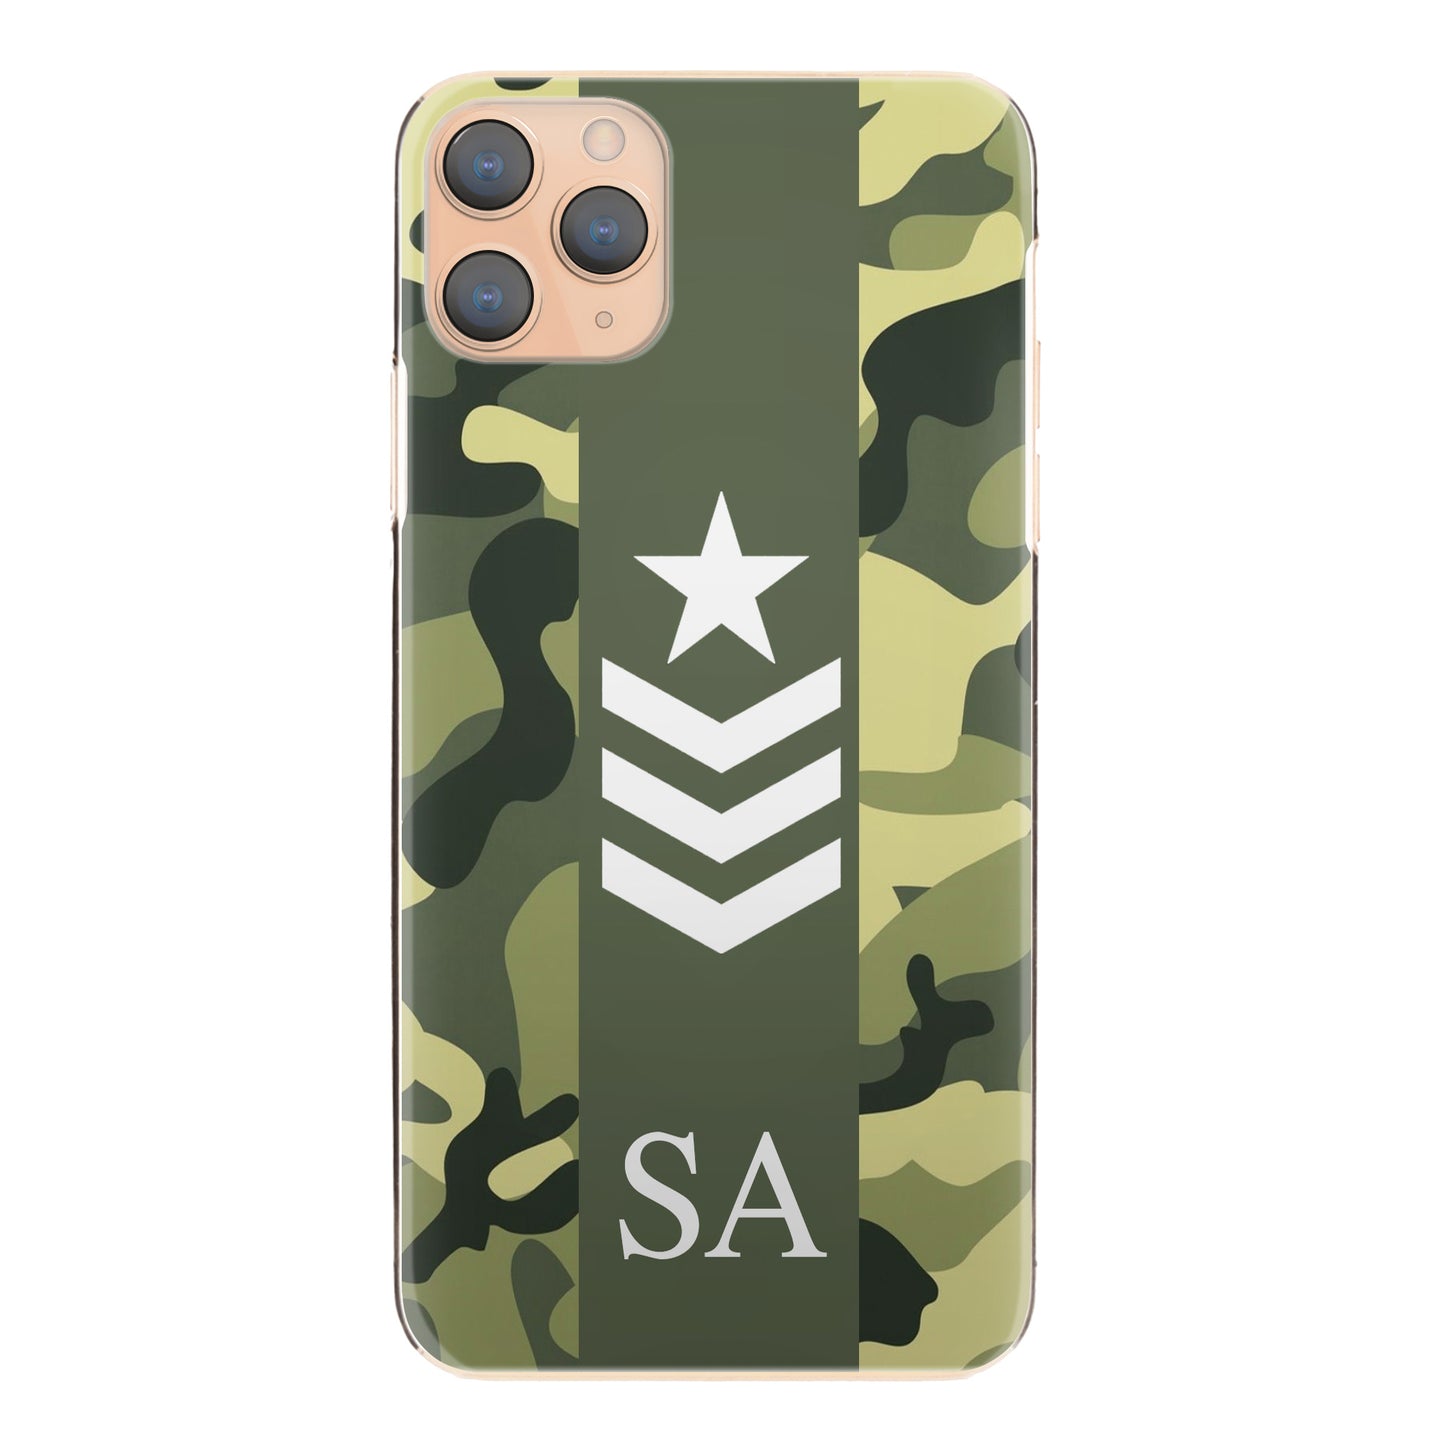 Personalised Google Phone Hard Case with Initials and Army Rank on Classic Green Camo